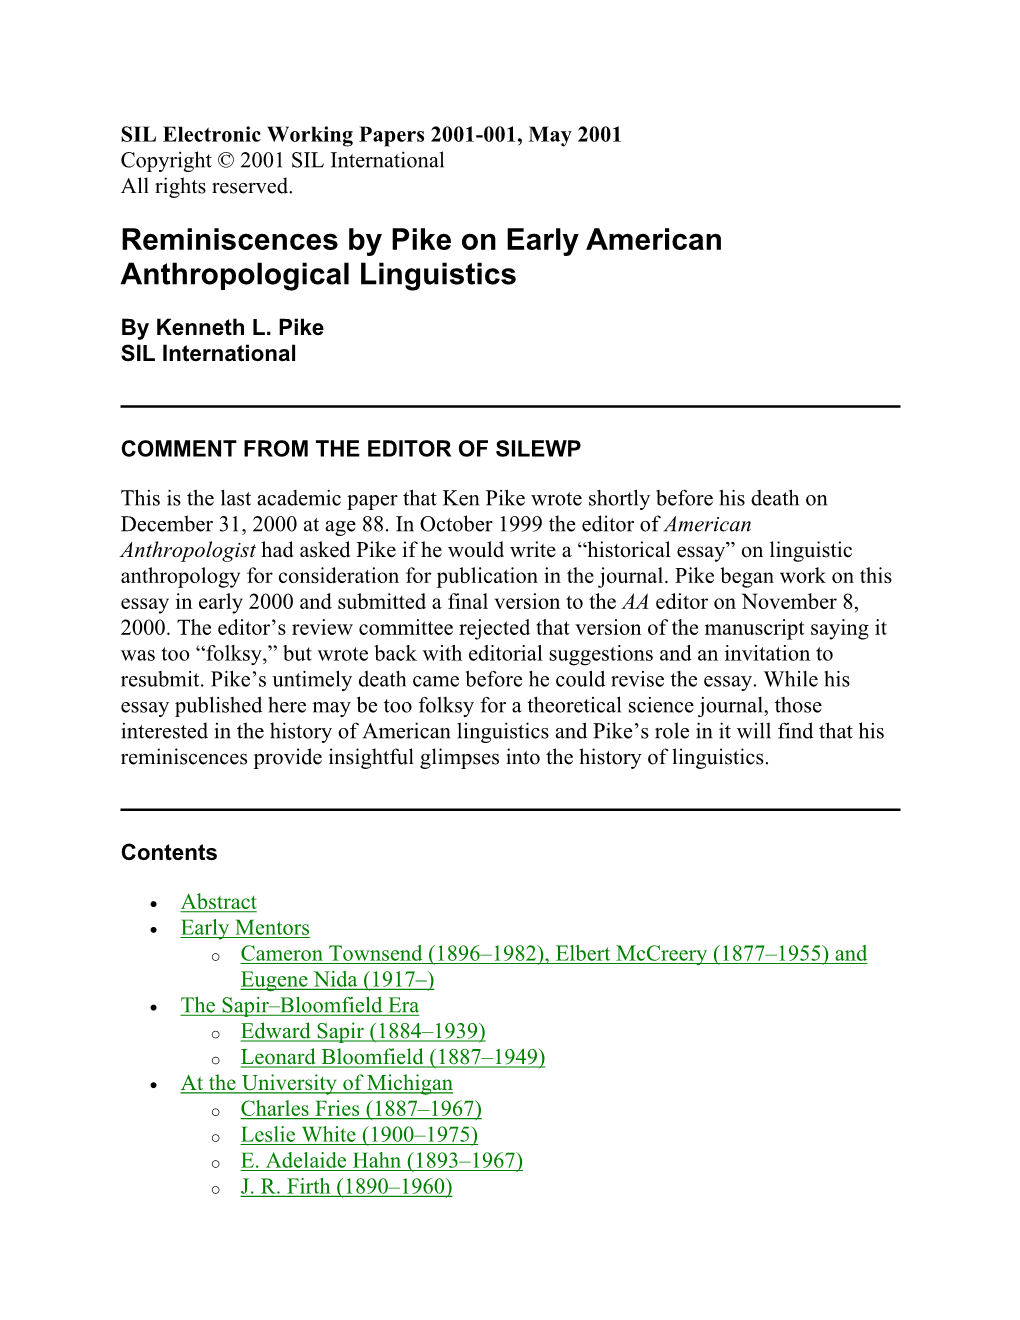 Reminiscences by Pike on Early American Anthropological Linguistics